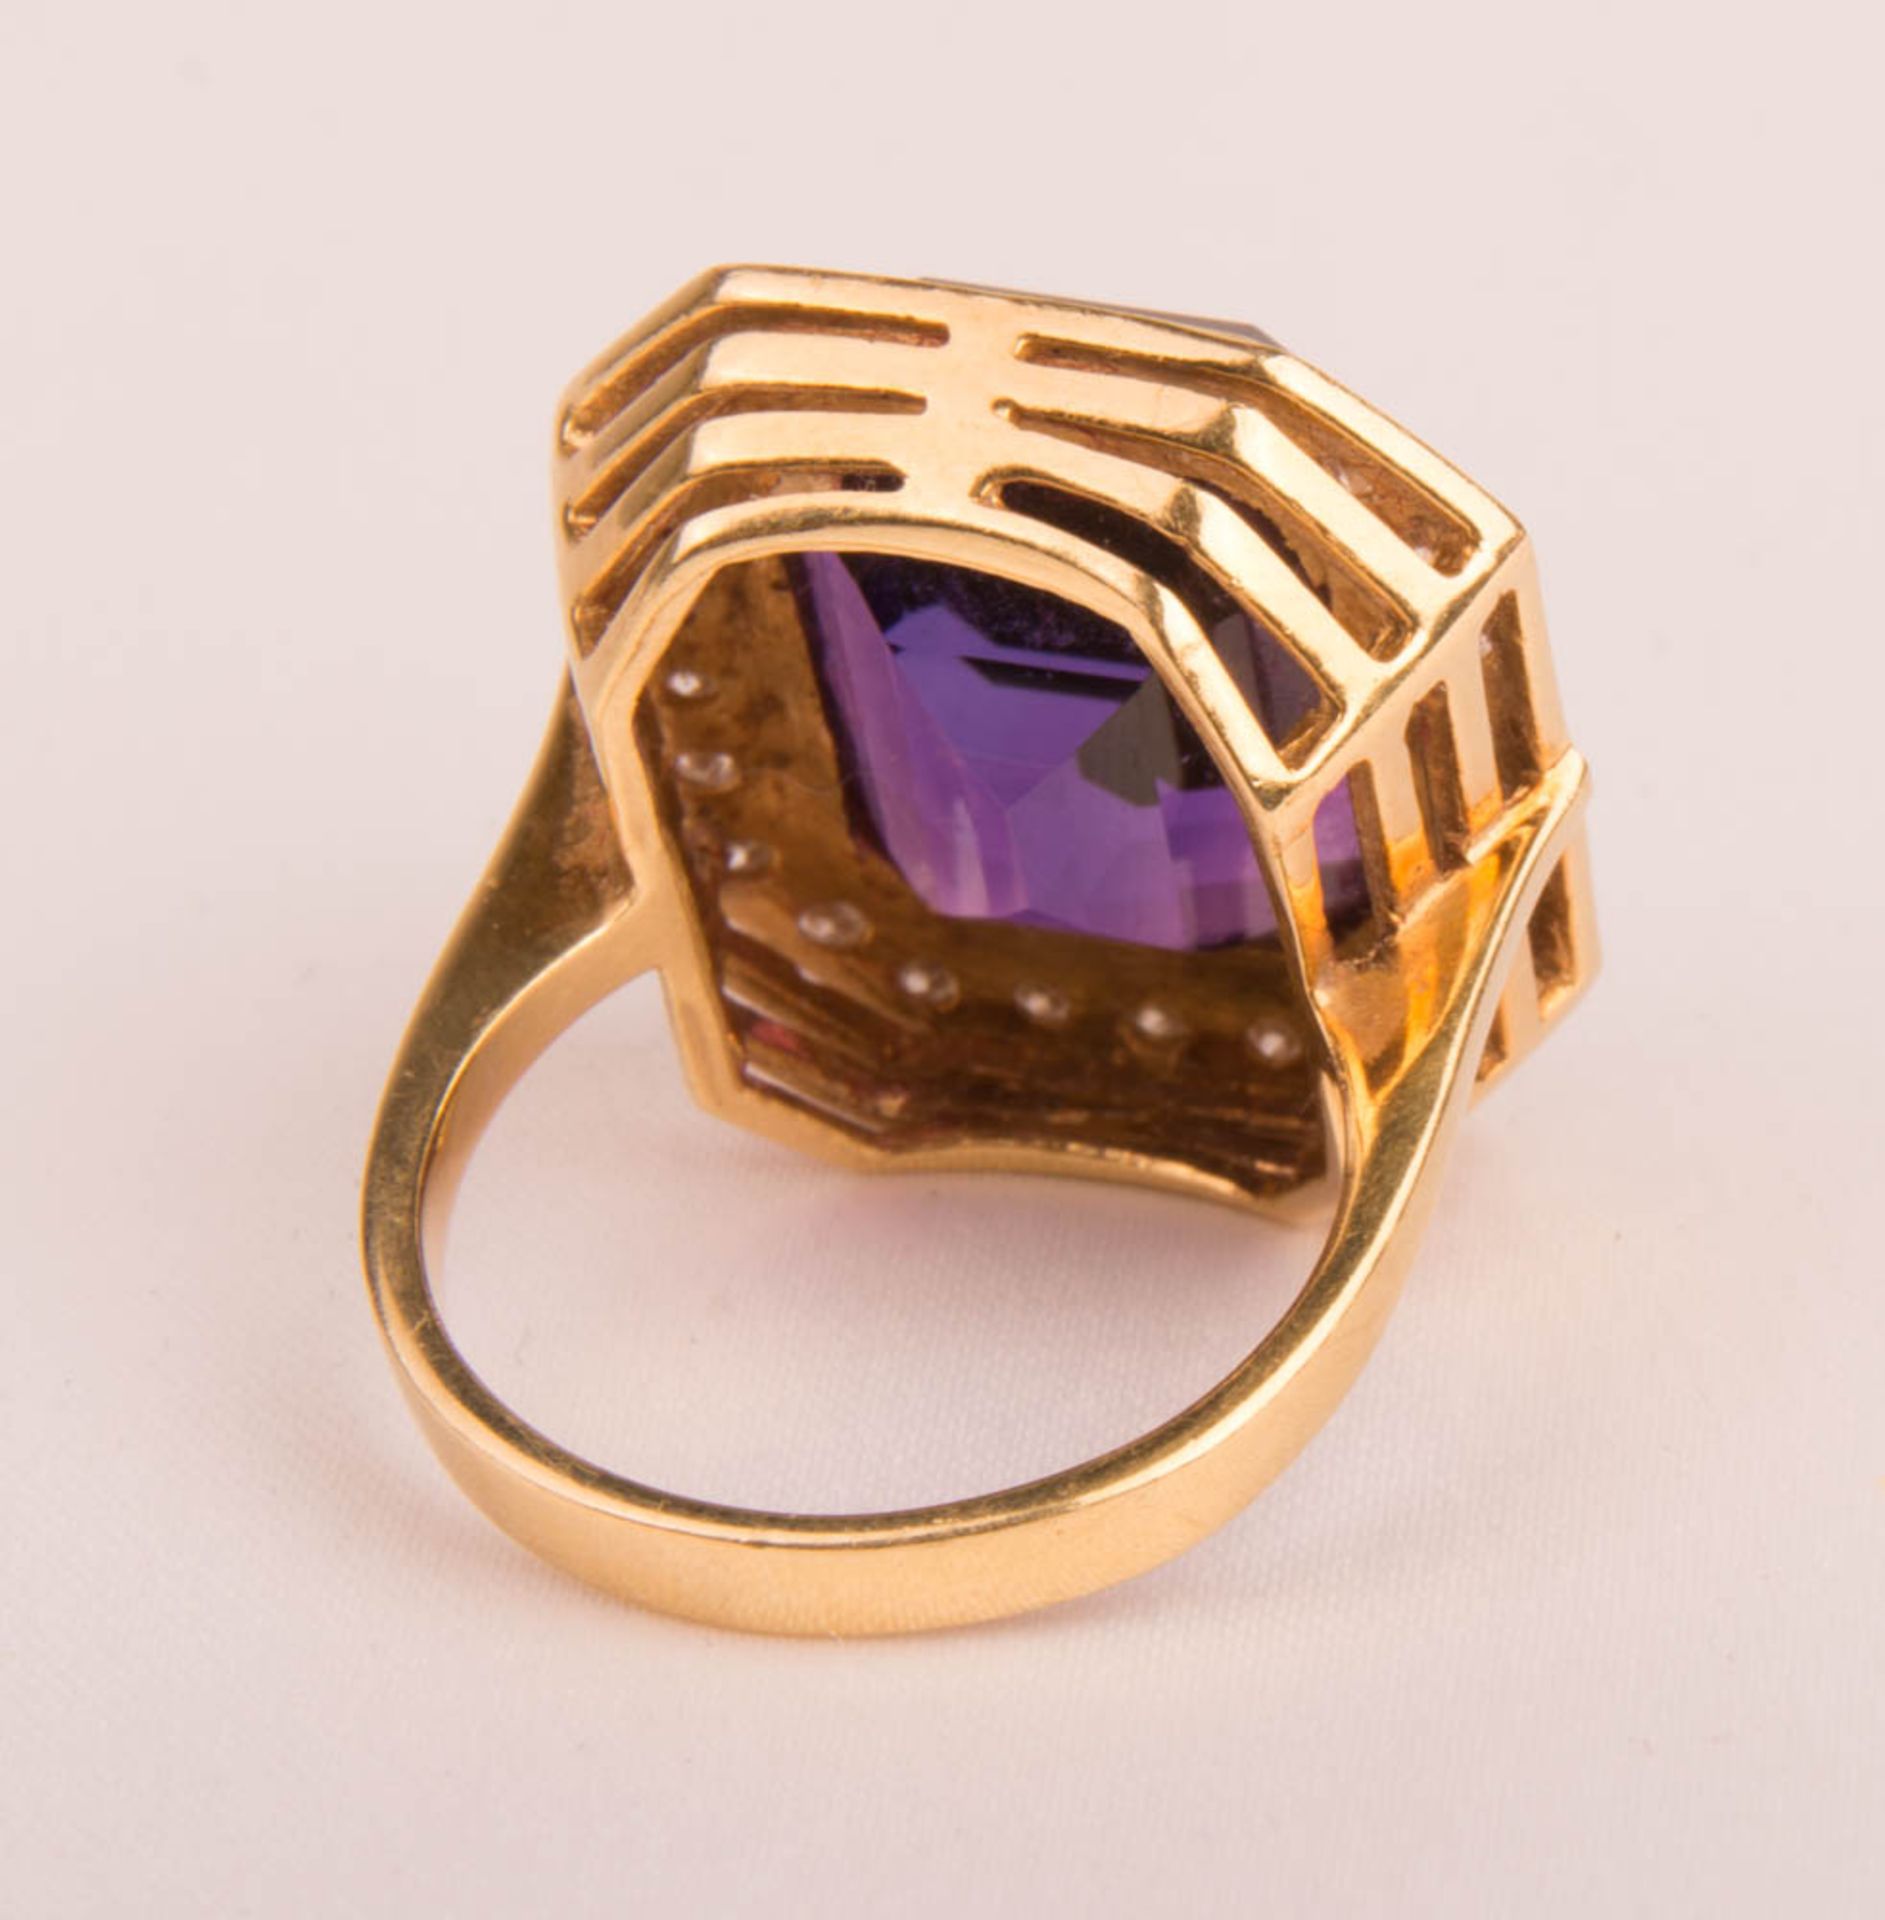 Ring with amethyst and diamonds, 750 yellow gold. - Image 4 of 6